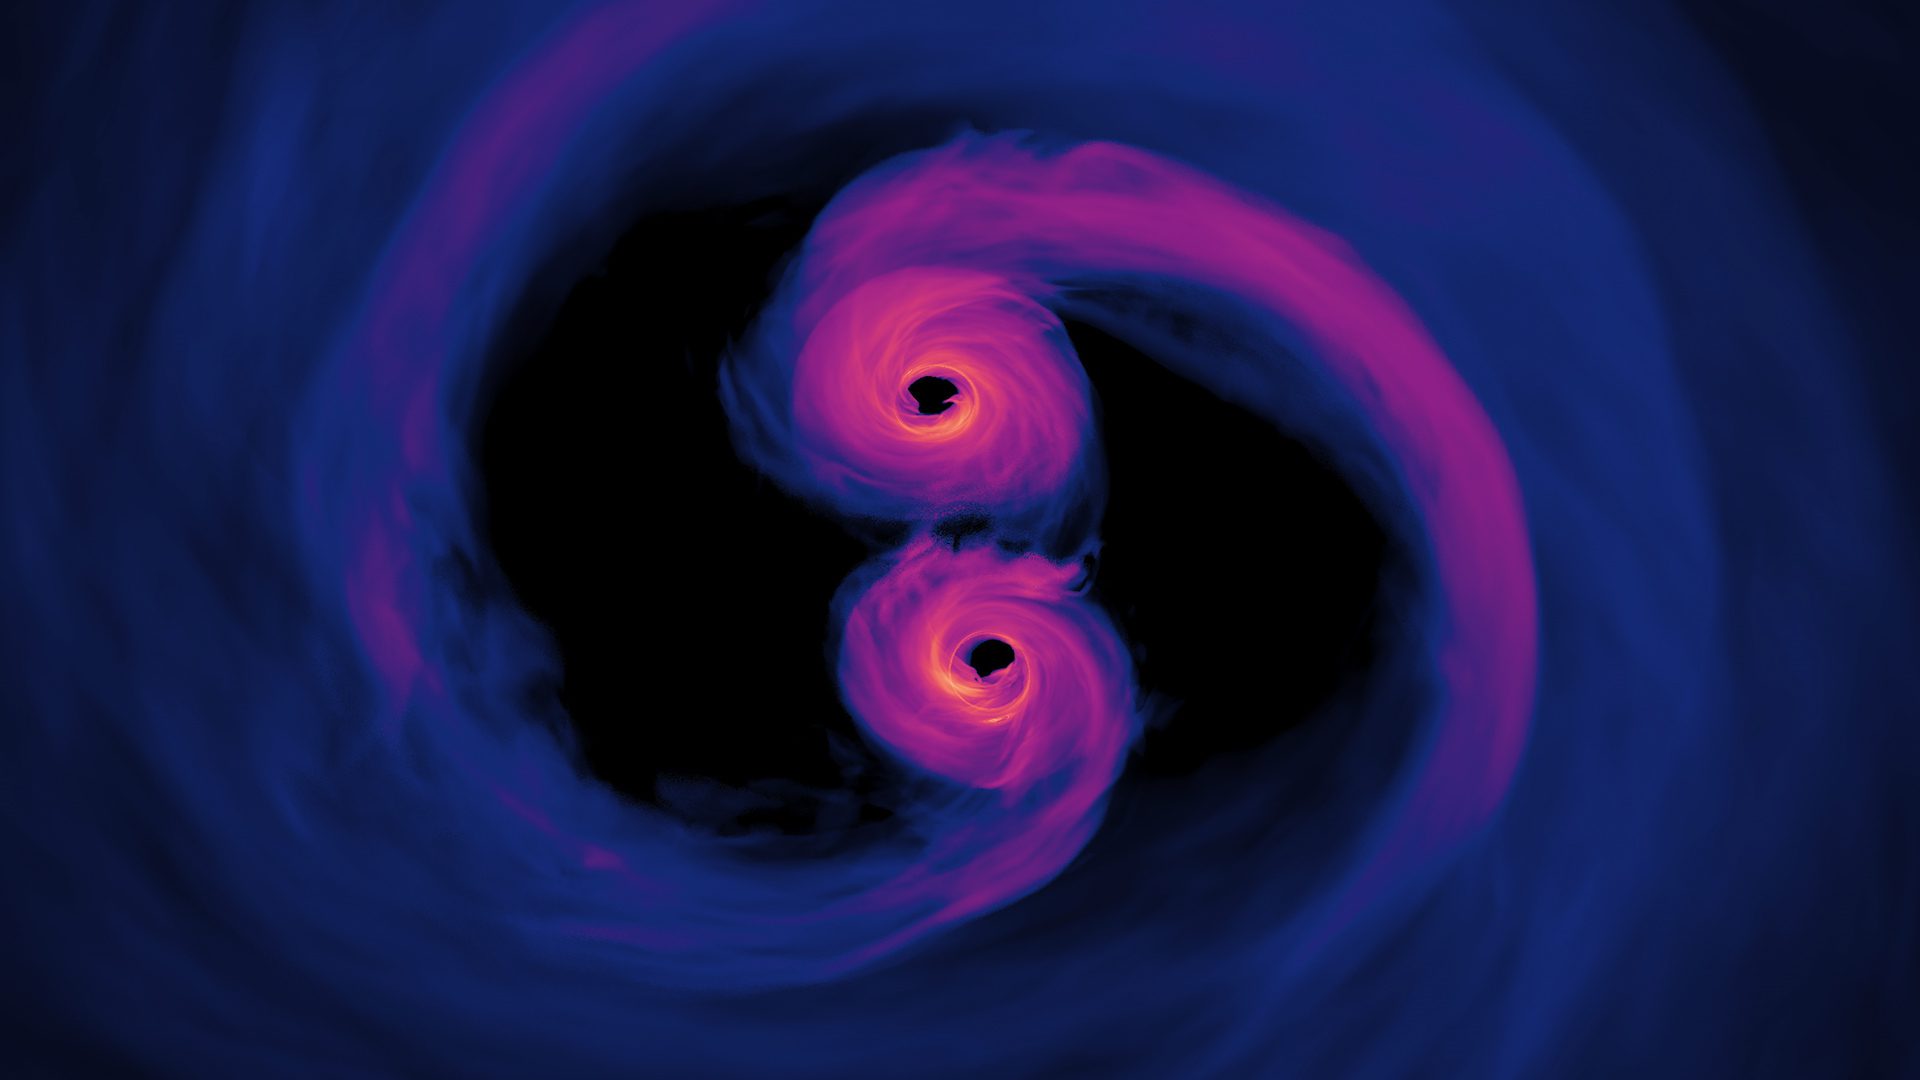 A simulation of two black holes merging